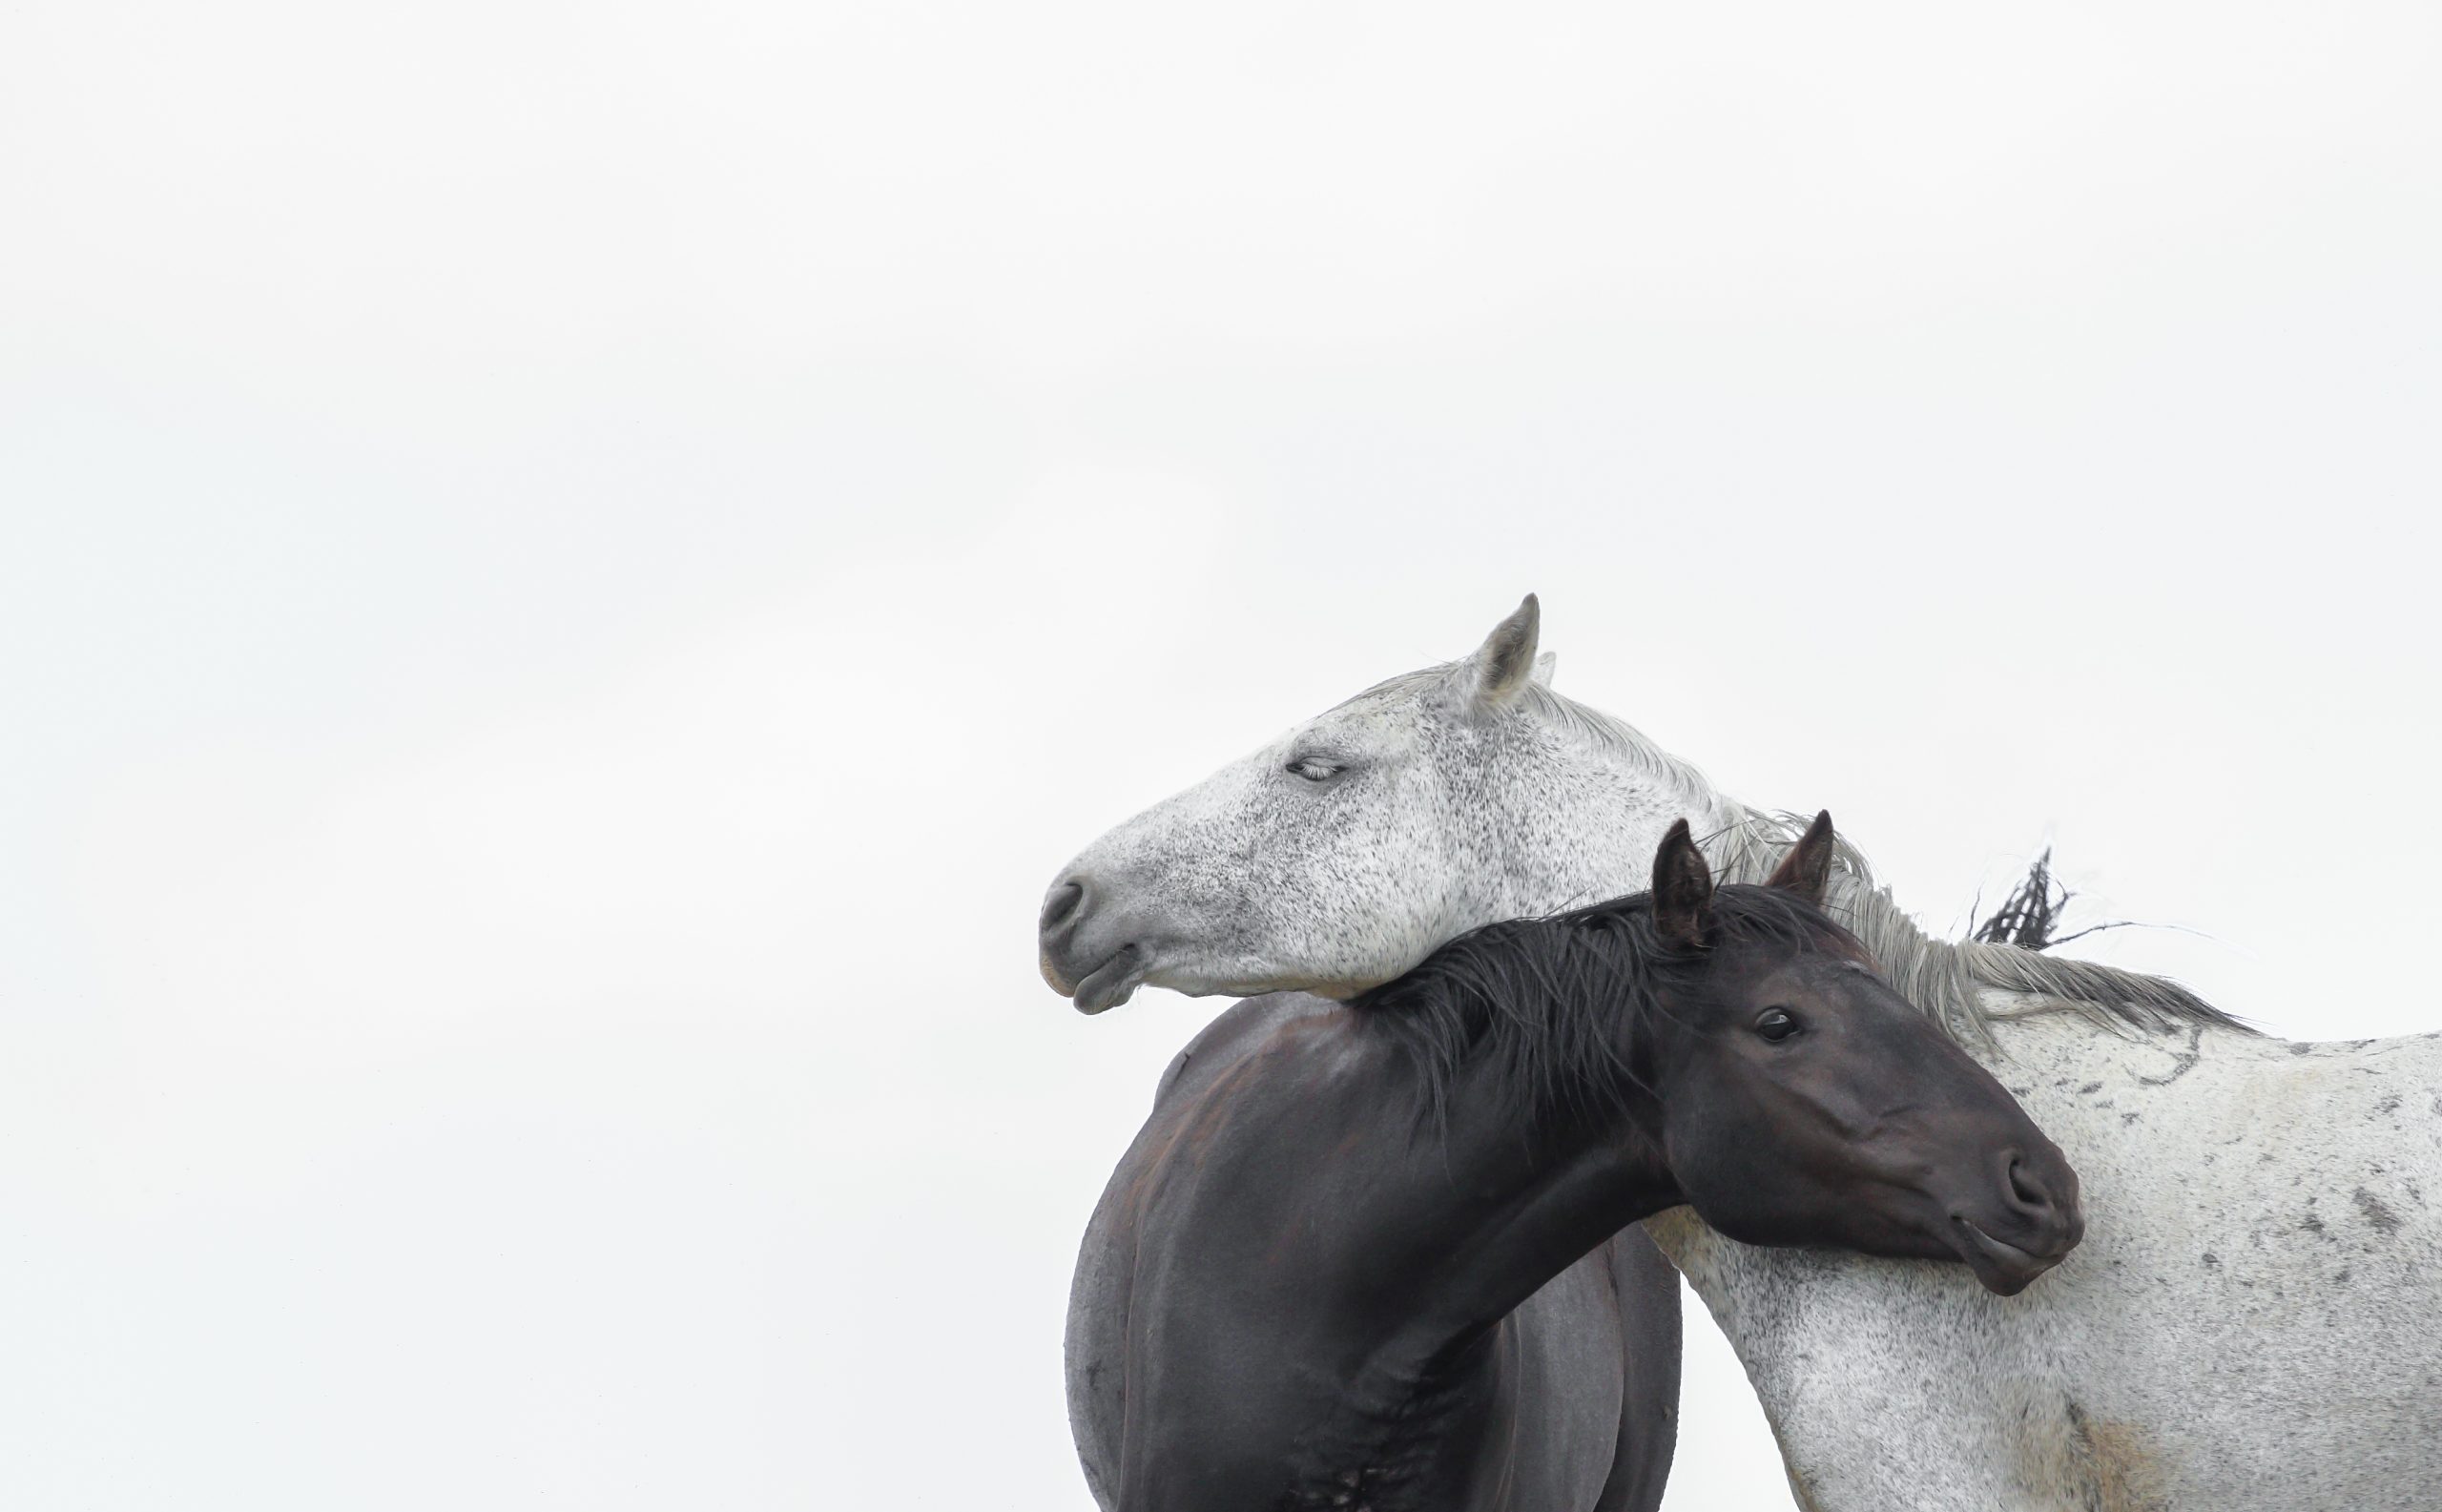 Two horses on an overcast day by Chad Hanson